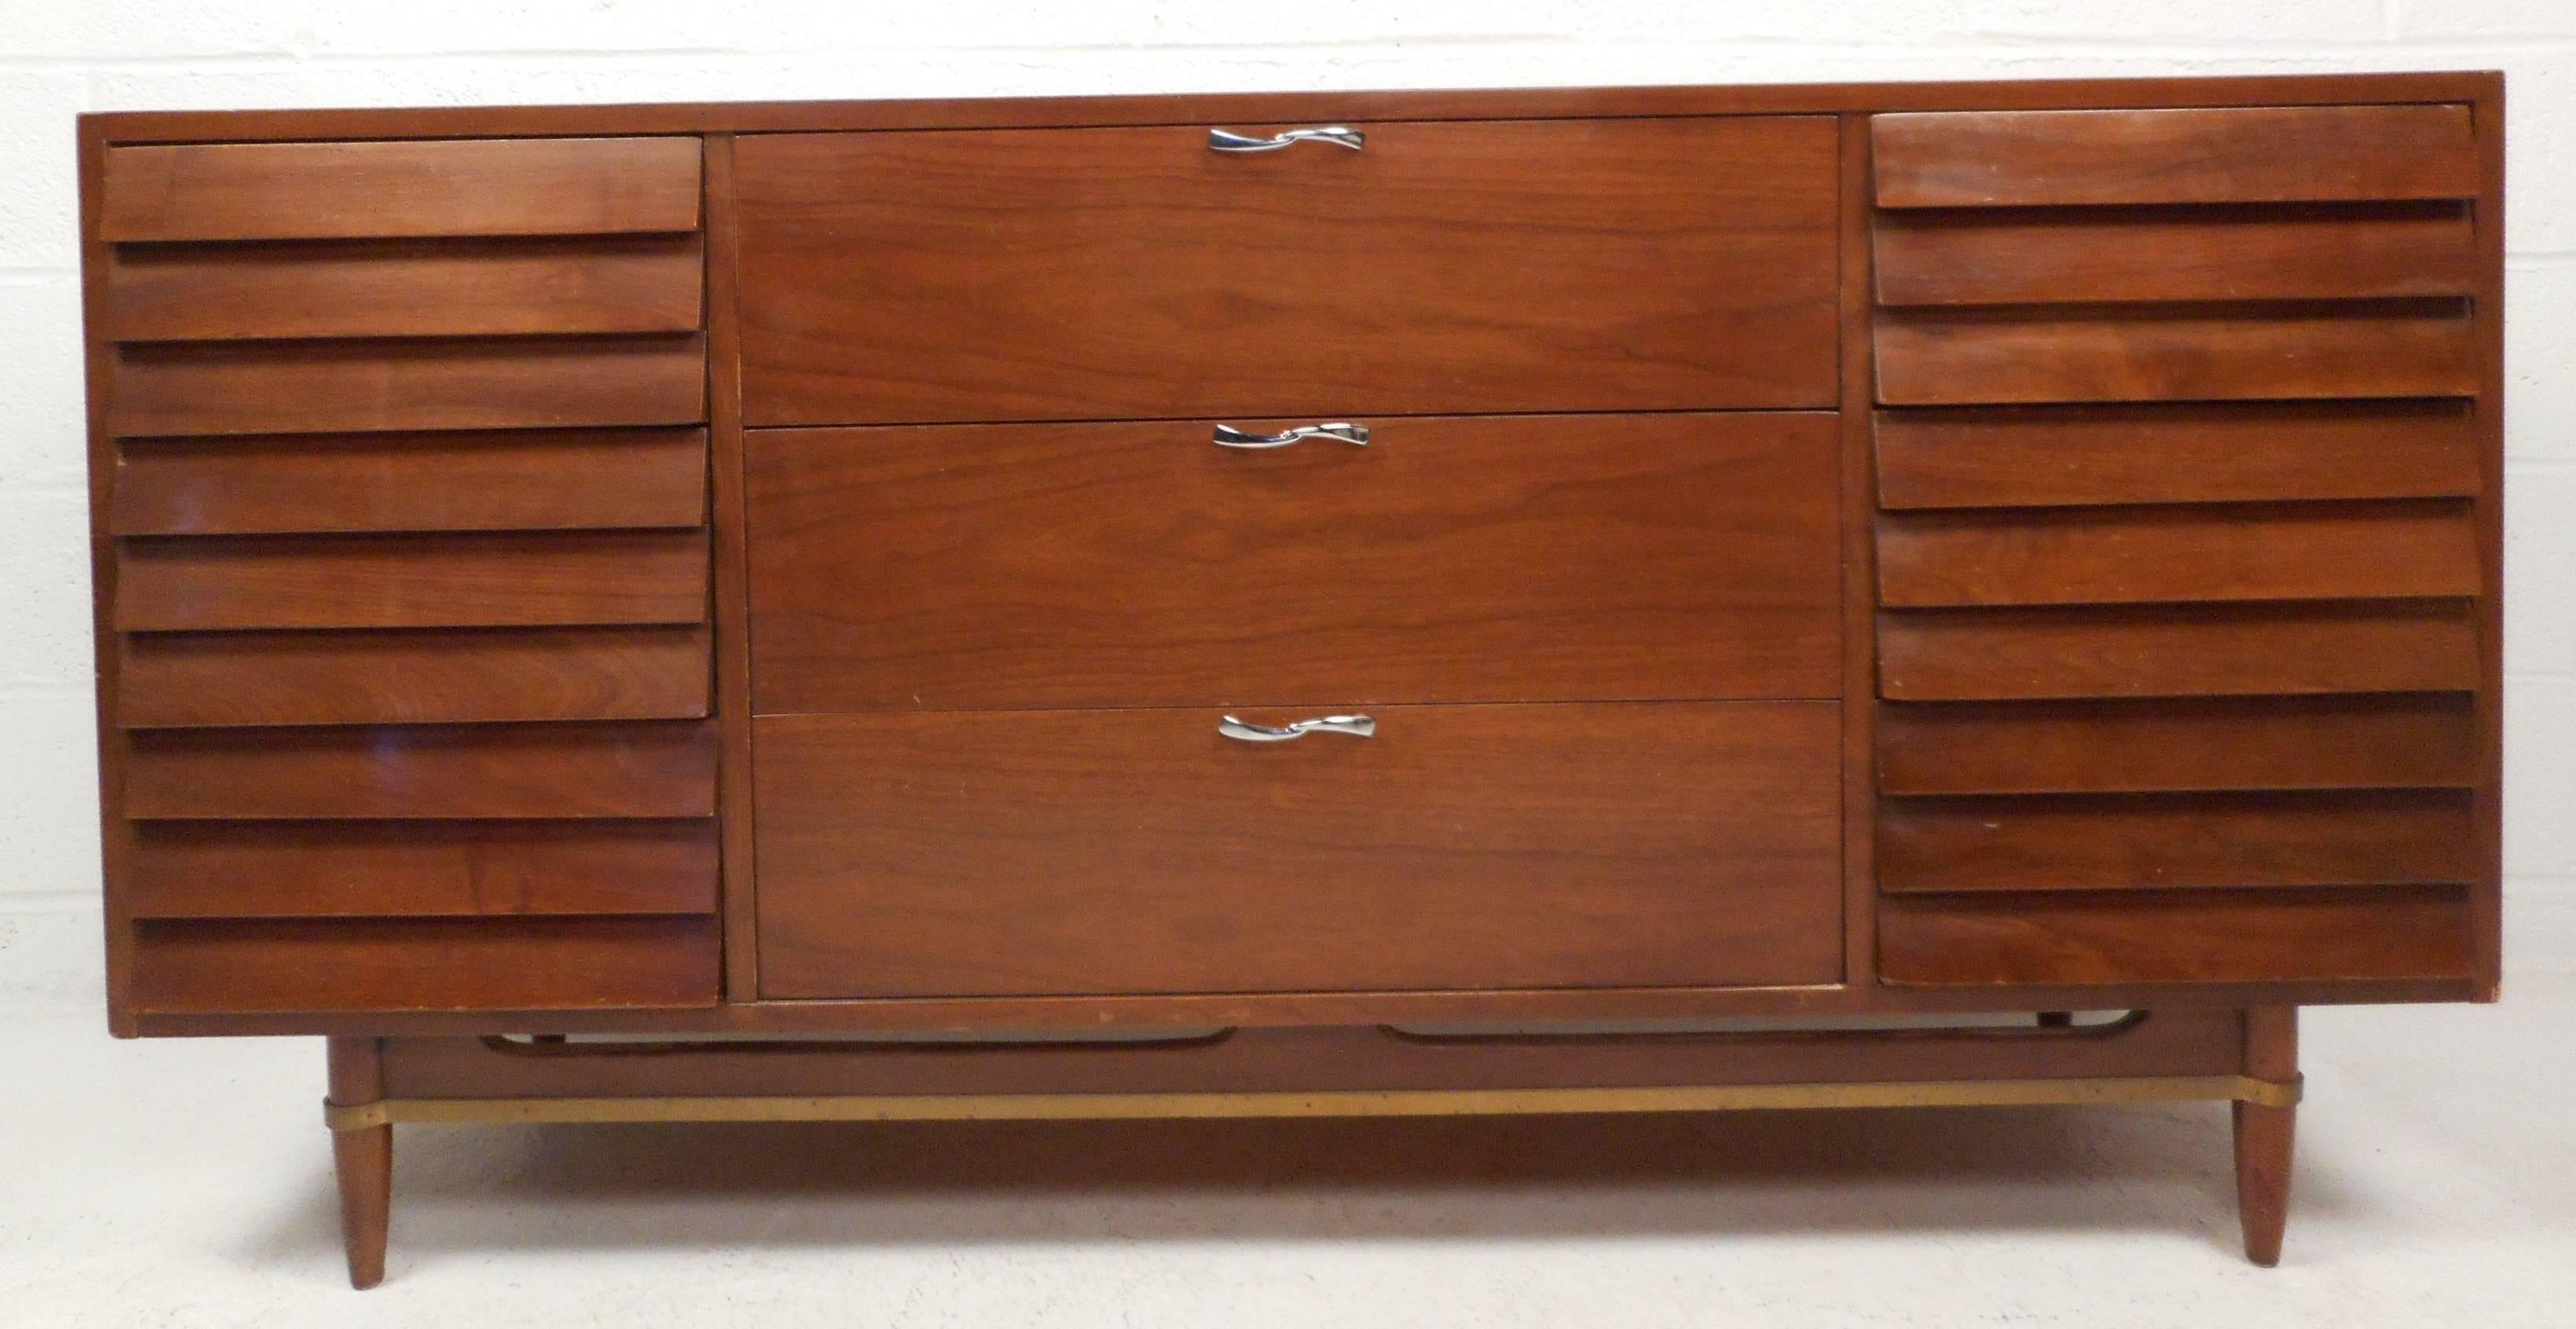 Impressive Mid-Century Modern American walnut dresser features nine hefty drawers providing plenty of room for storage. Sleek design with a sculpted base, brass wraparound trim, and tapered legs. The stylish louvered drawers on the outside and